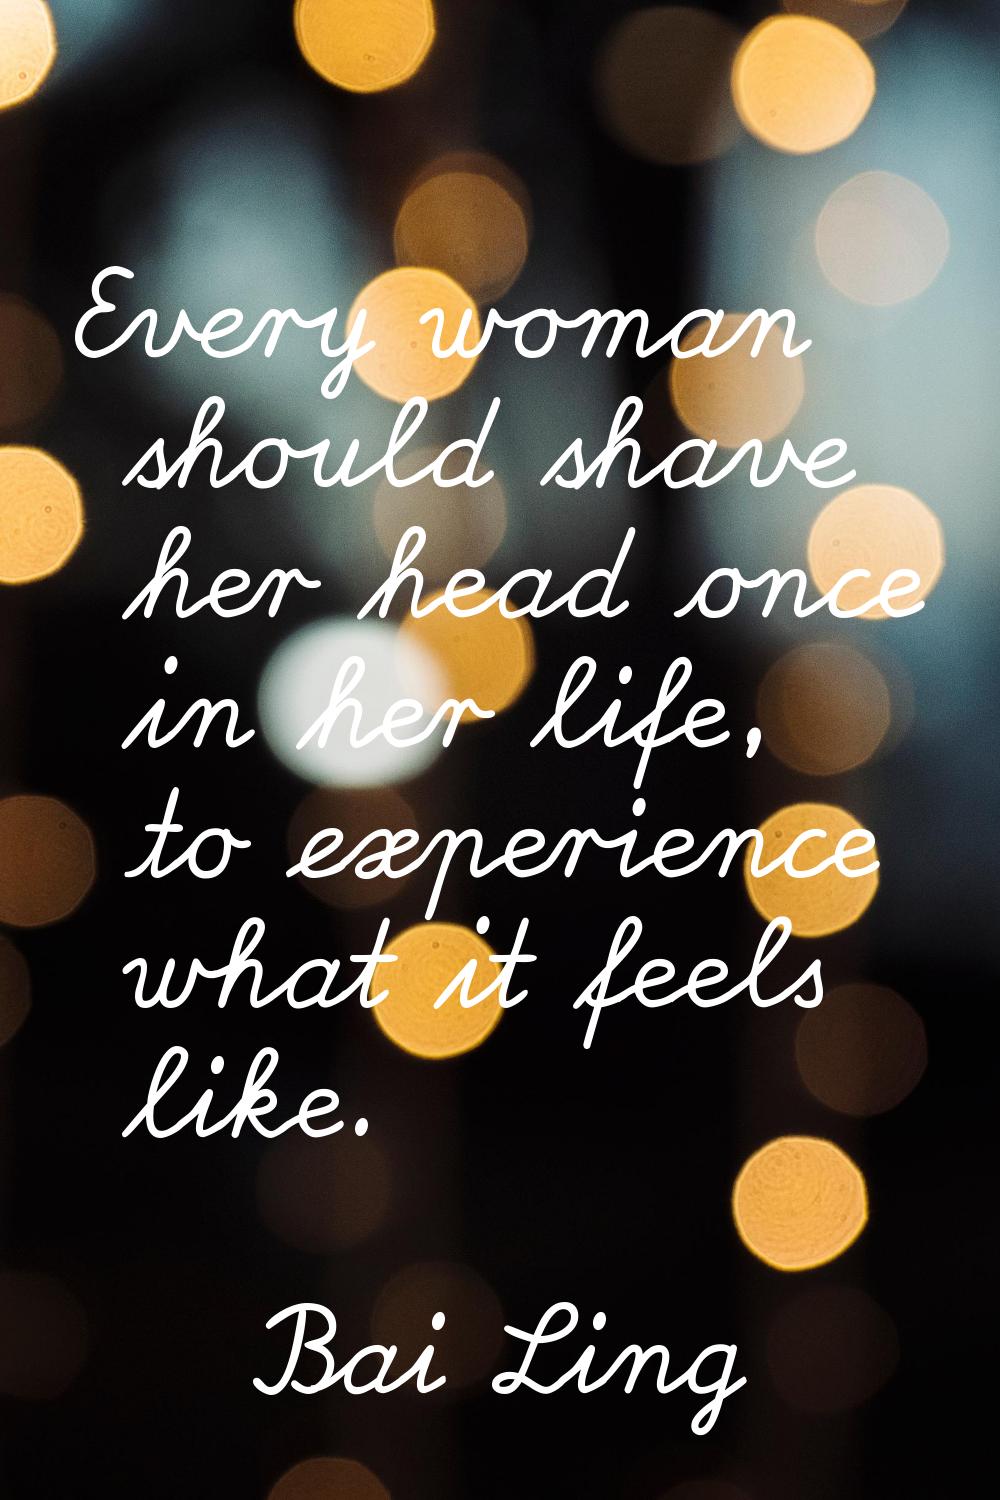 Every woman should shave her head once in her life, to experience what it feels like.